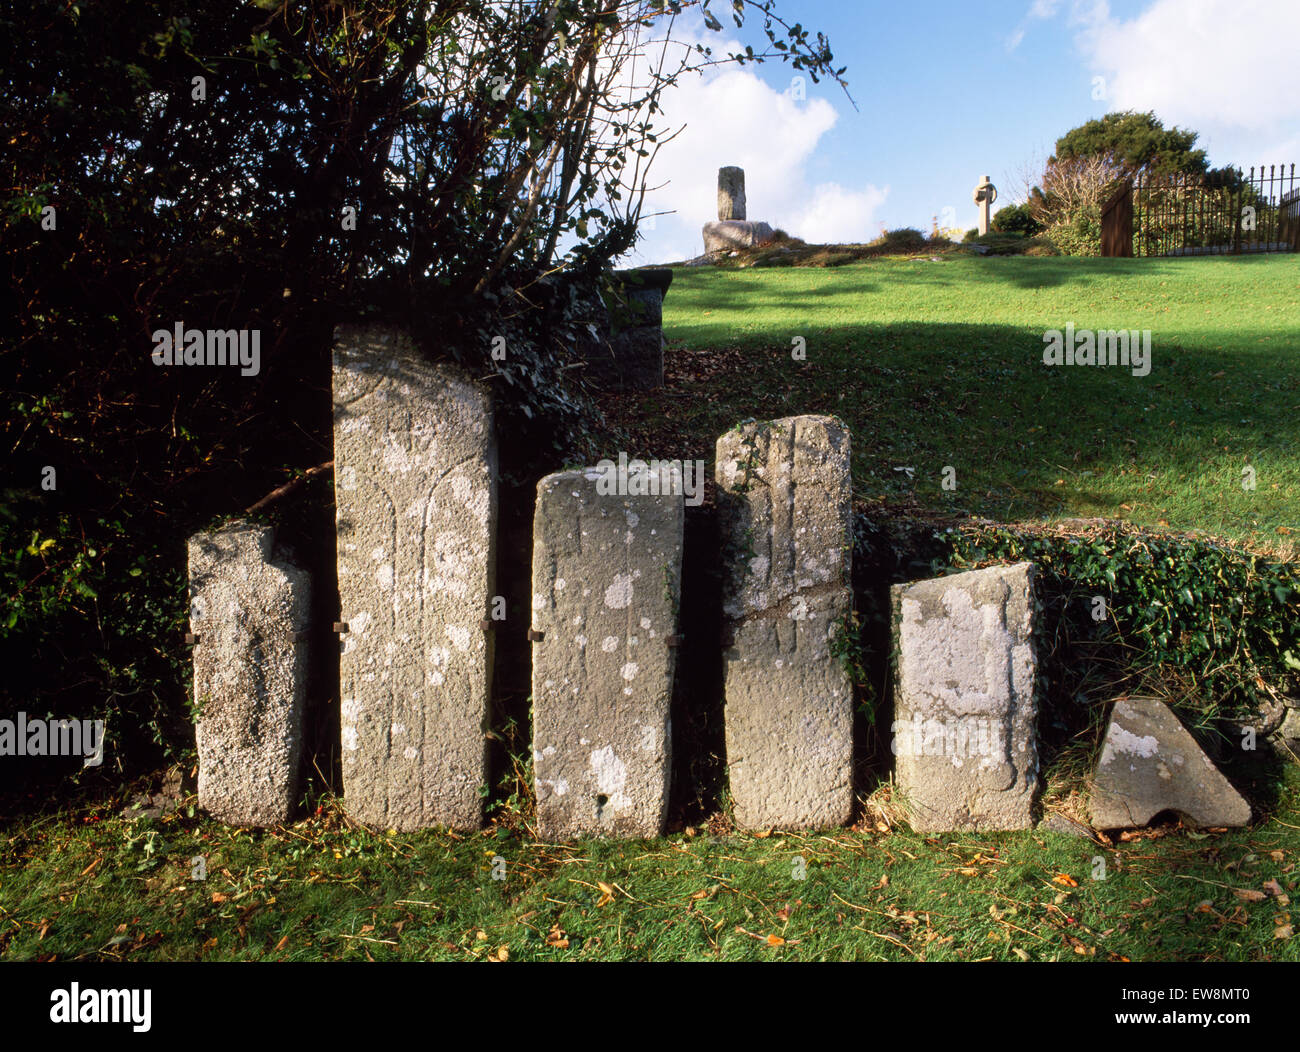 Early Medieval cross-marked gravestones in Llangaffo churchyard, Anglesey: cross-shaft & old church foundations on outcrop. Early monastic site. Stock Photo